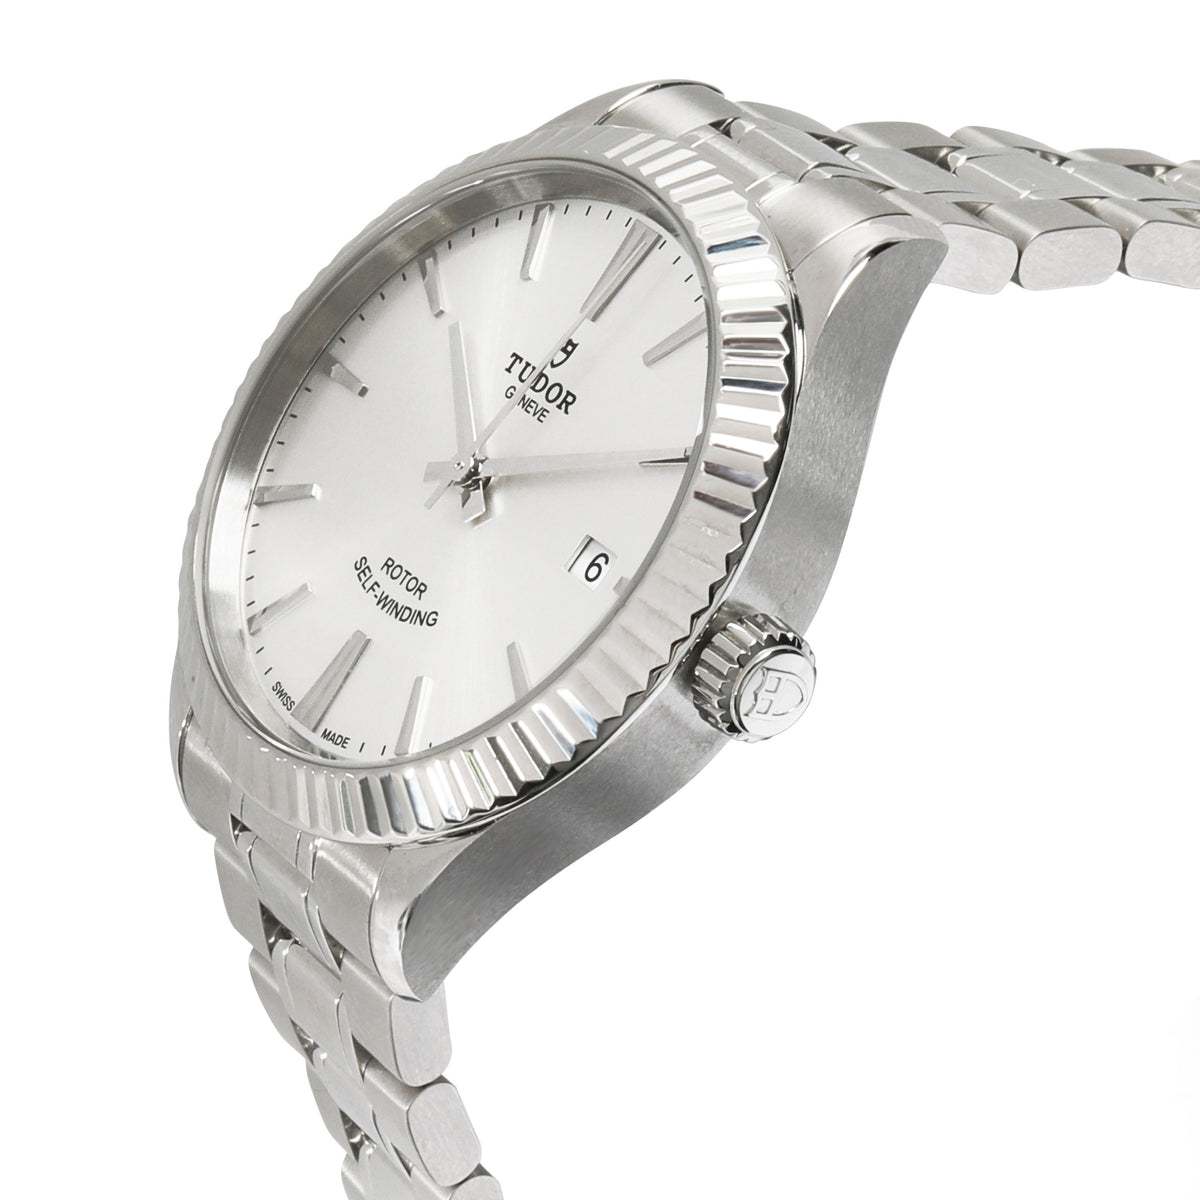 Tudor Style 12510 Men's Watch in  Stainless Steel